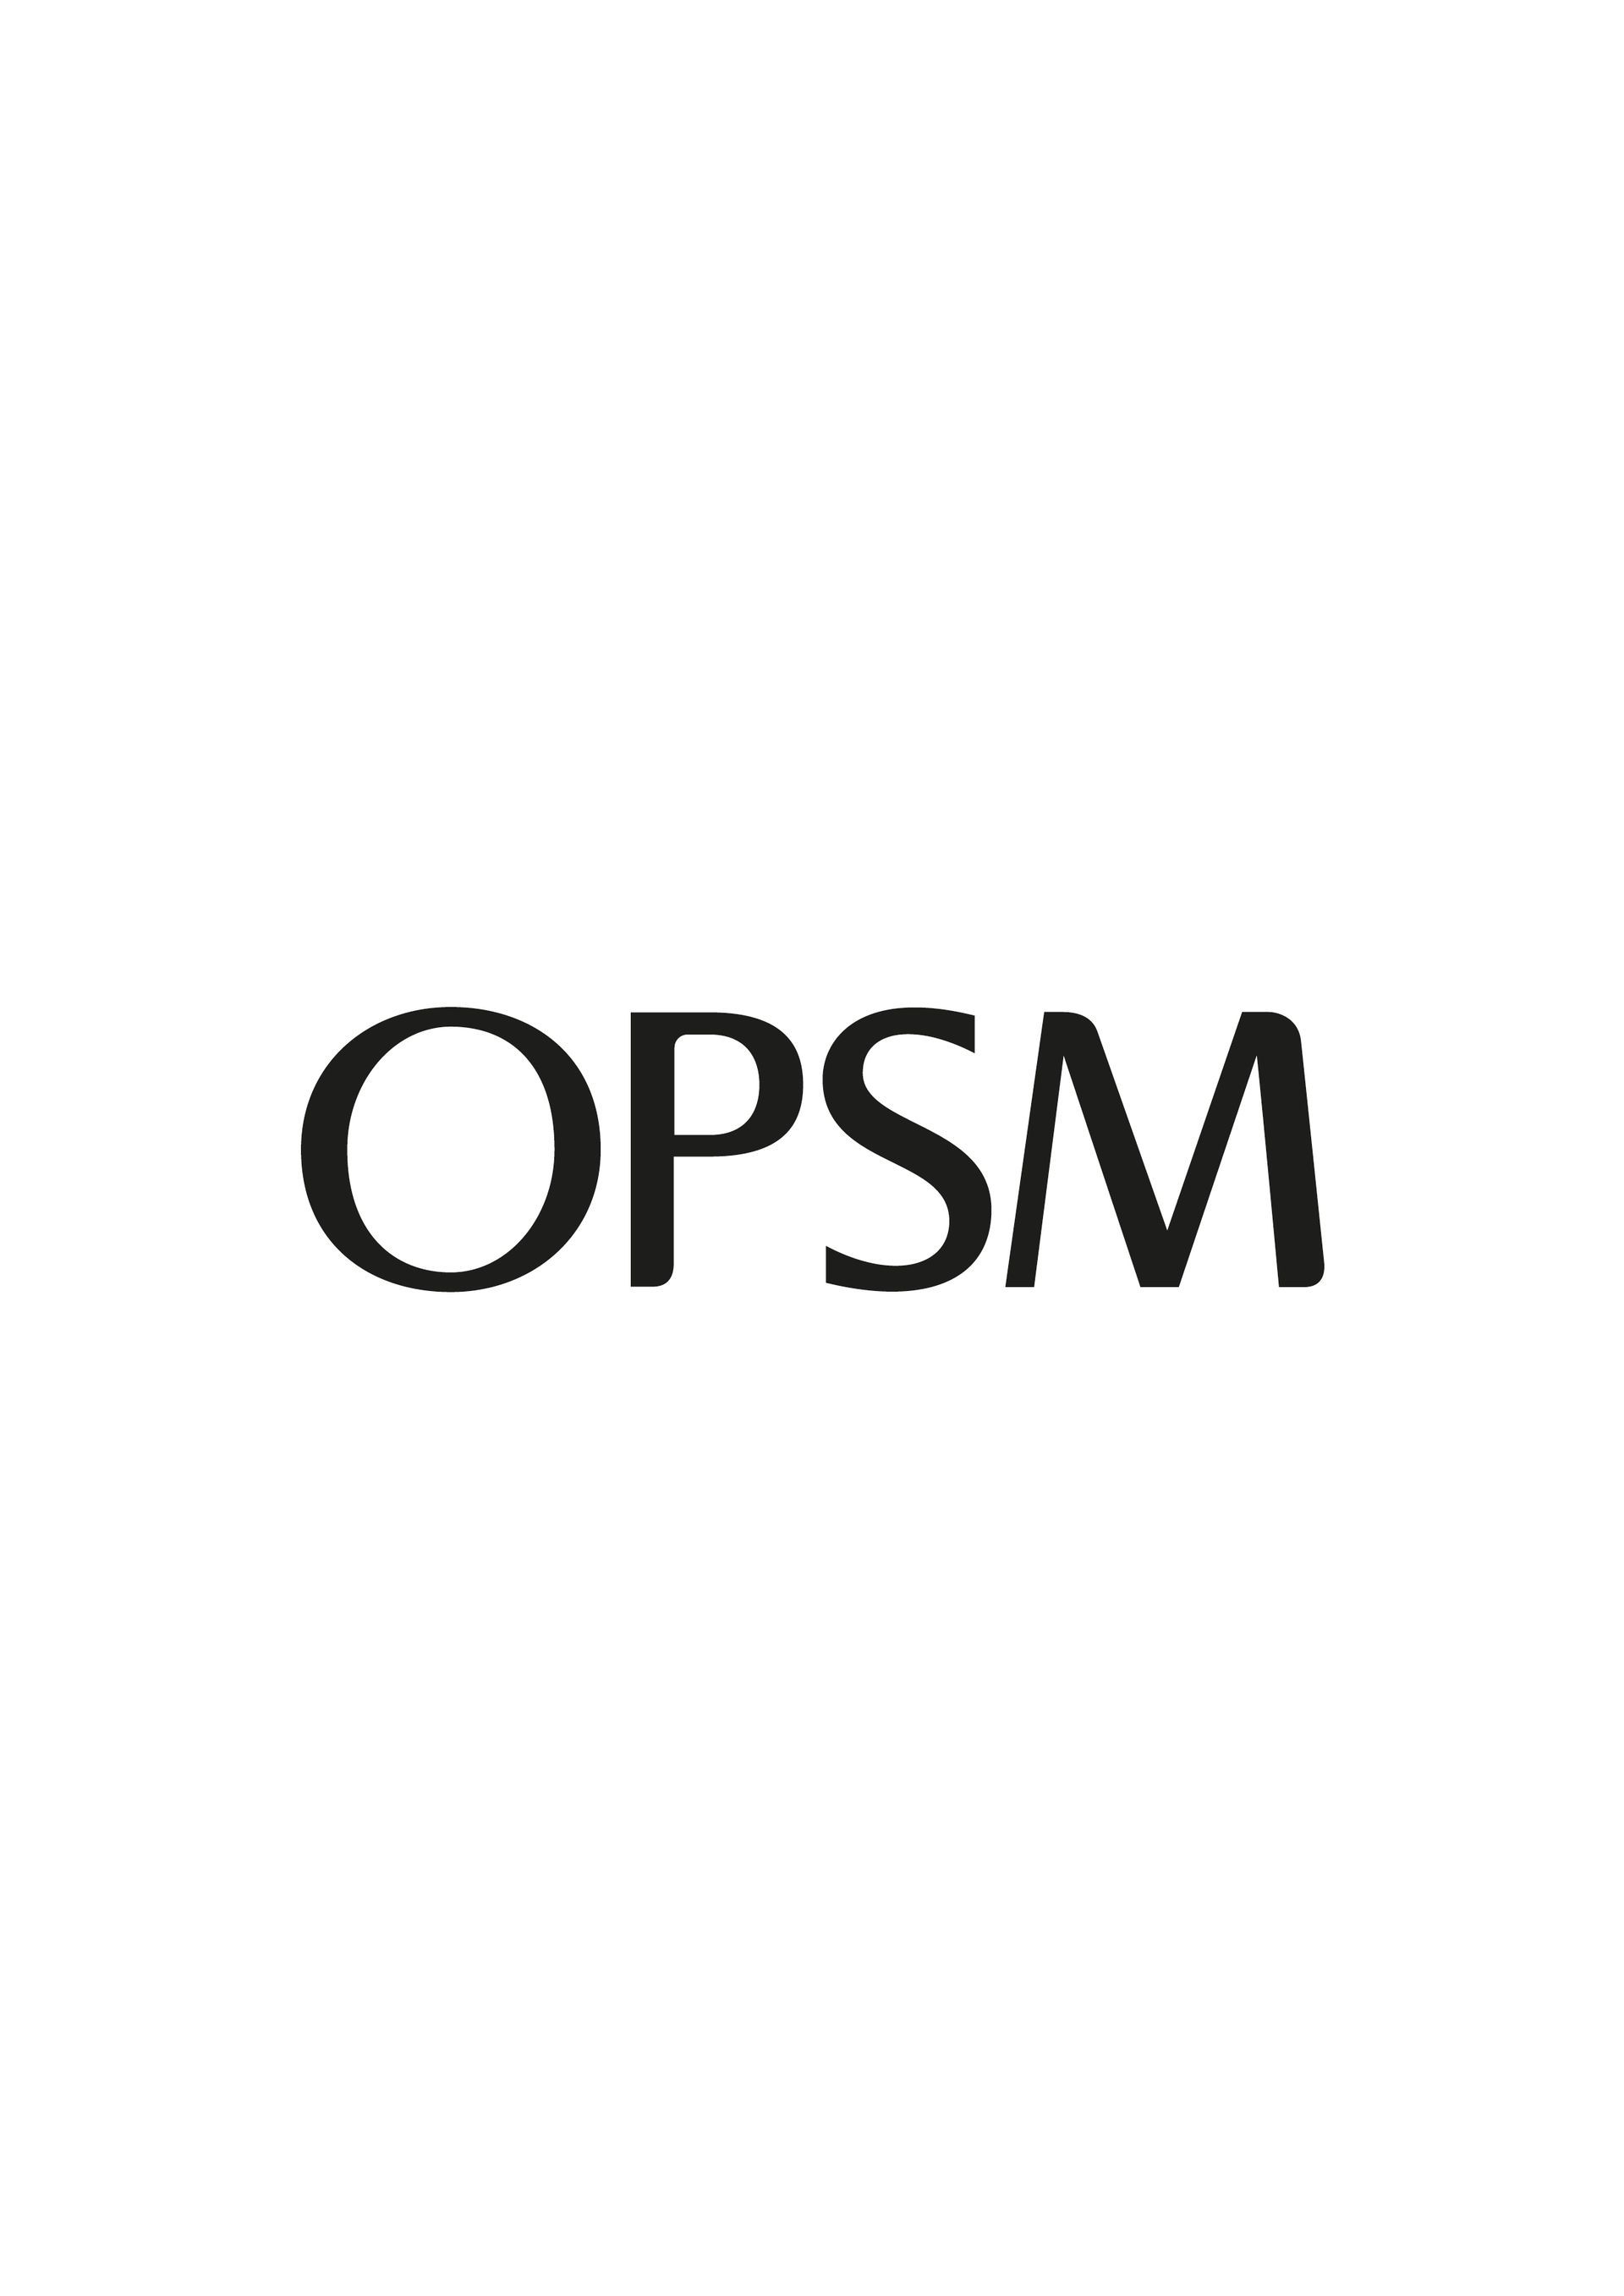 At OPSM, we love taking care of eyes.